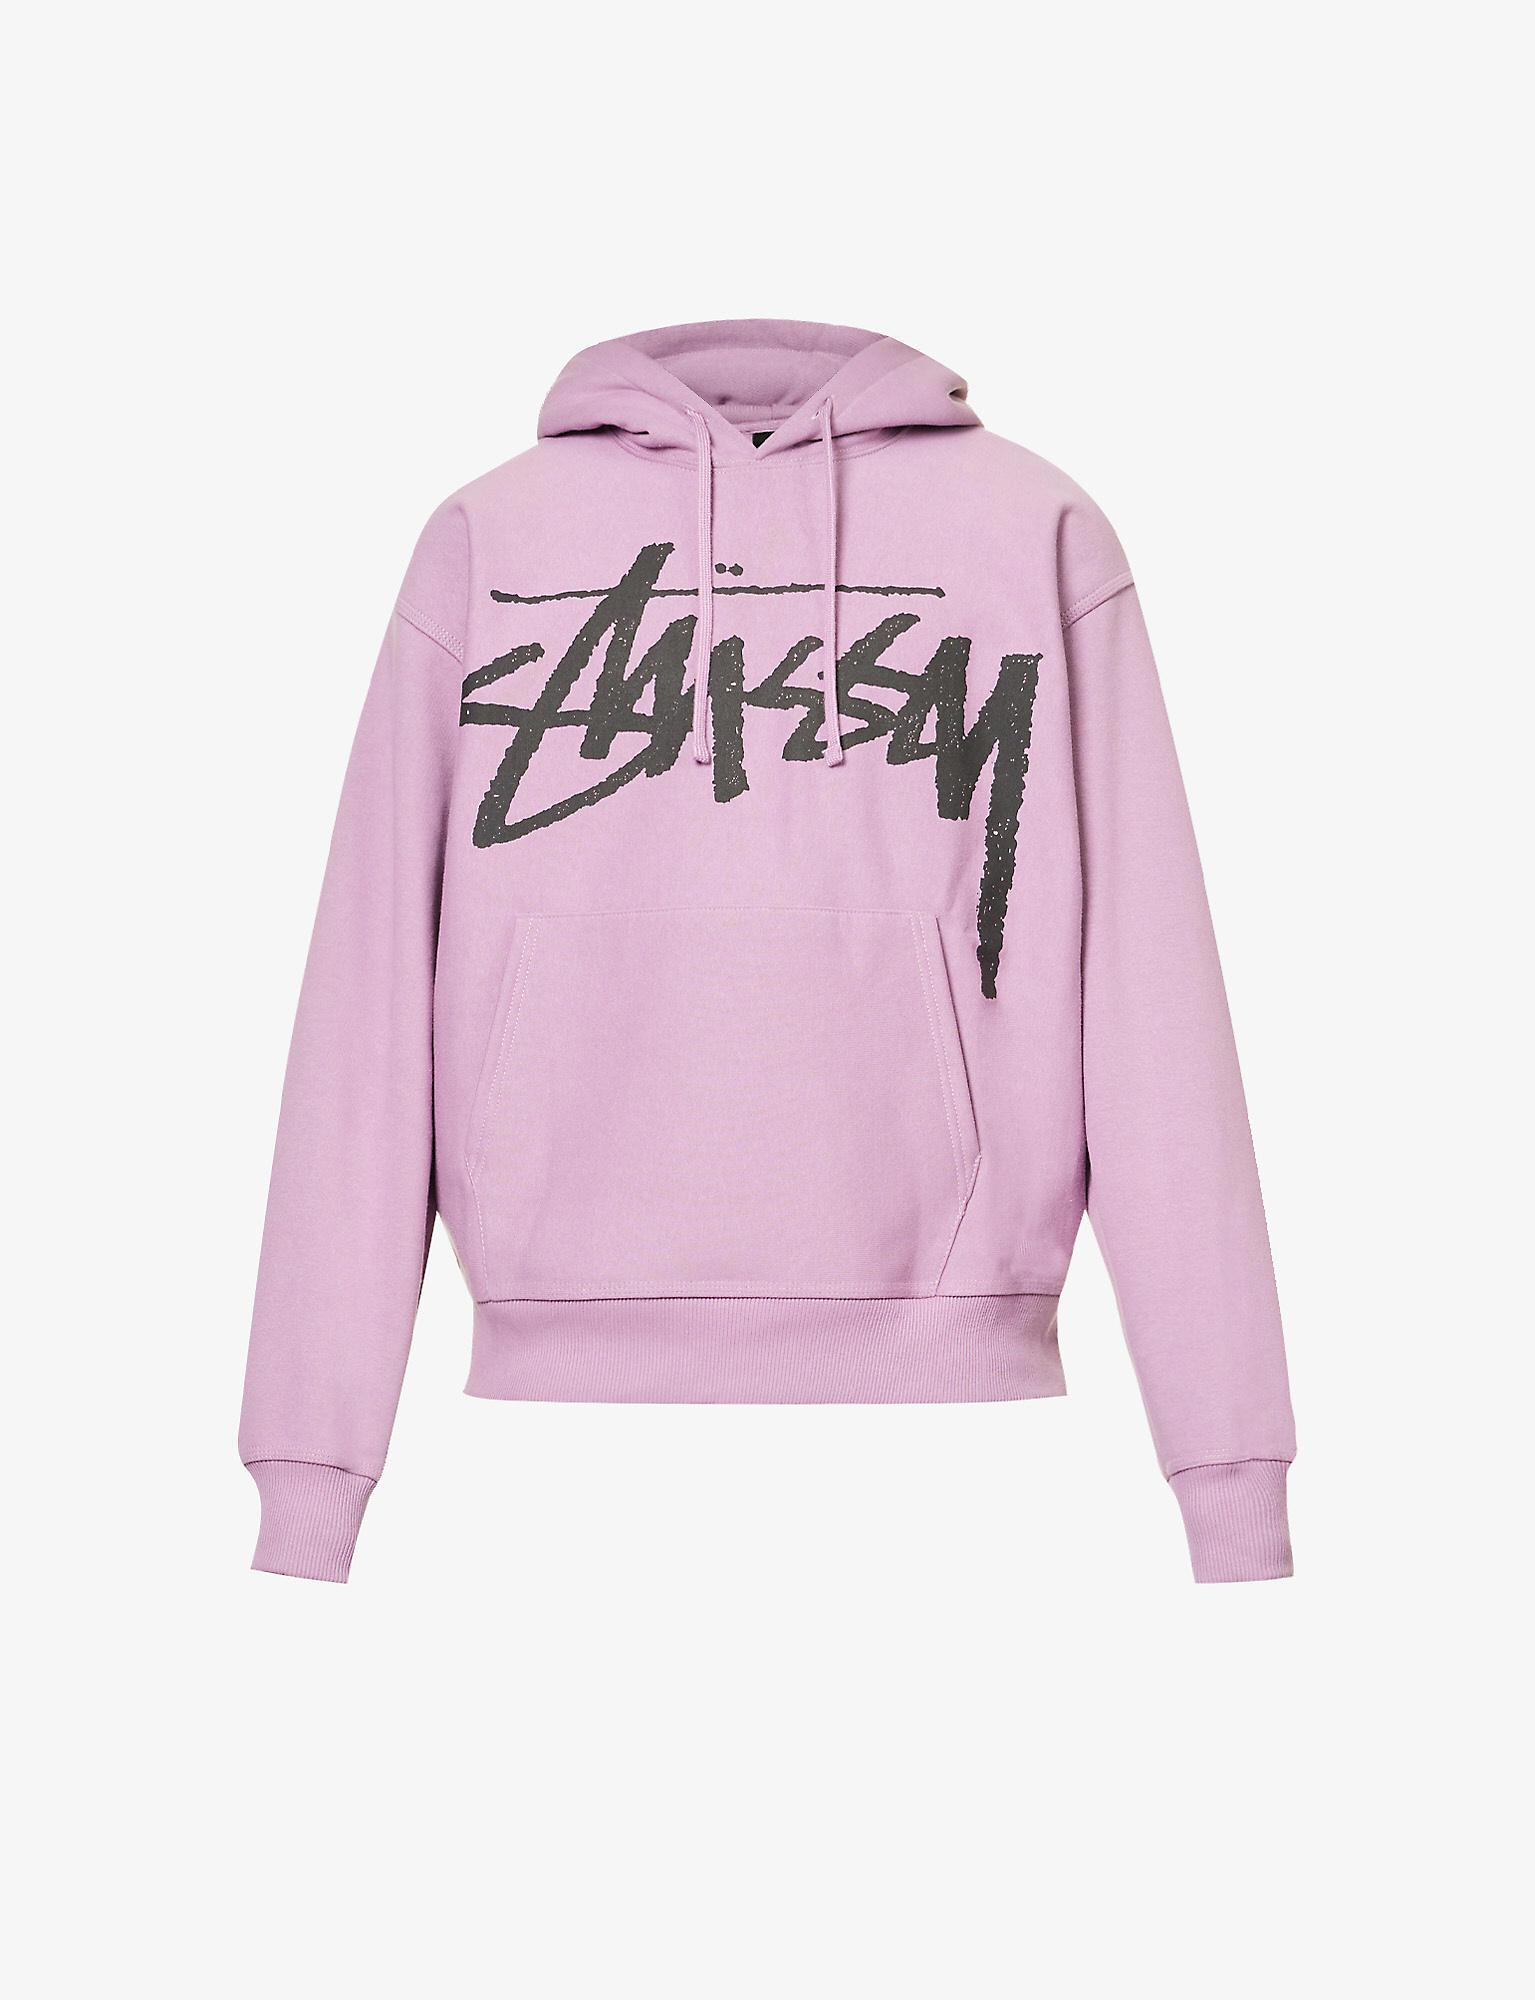 Stussy Big Stock Logo-print Cotton-blend Hoody in Pink for Men | Lyst